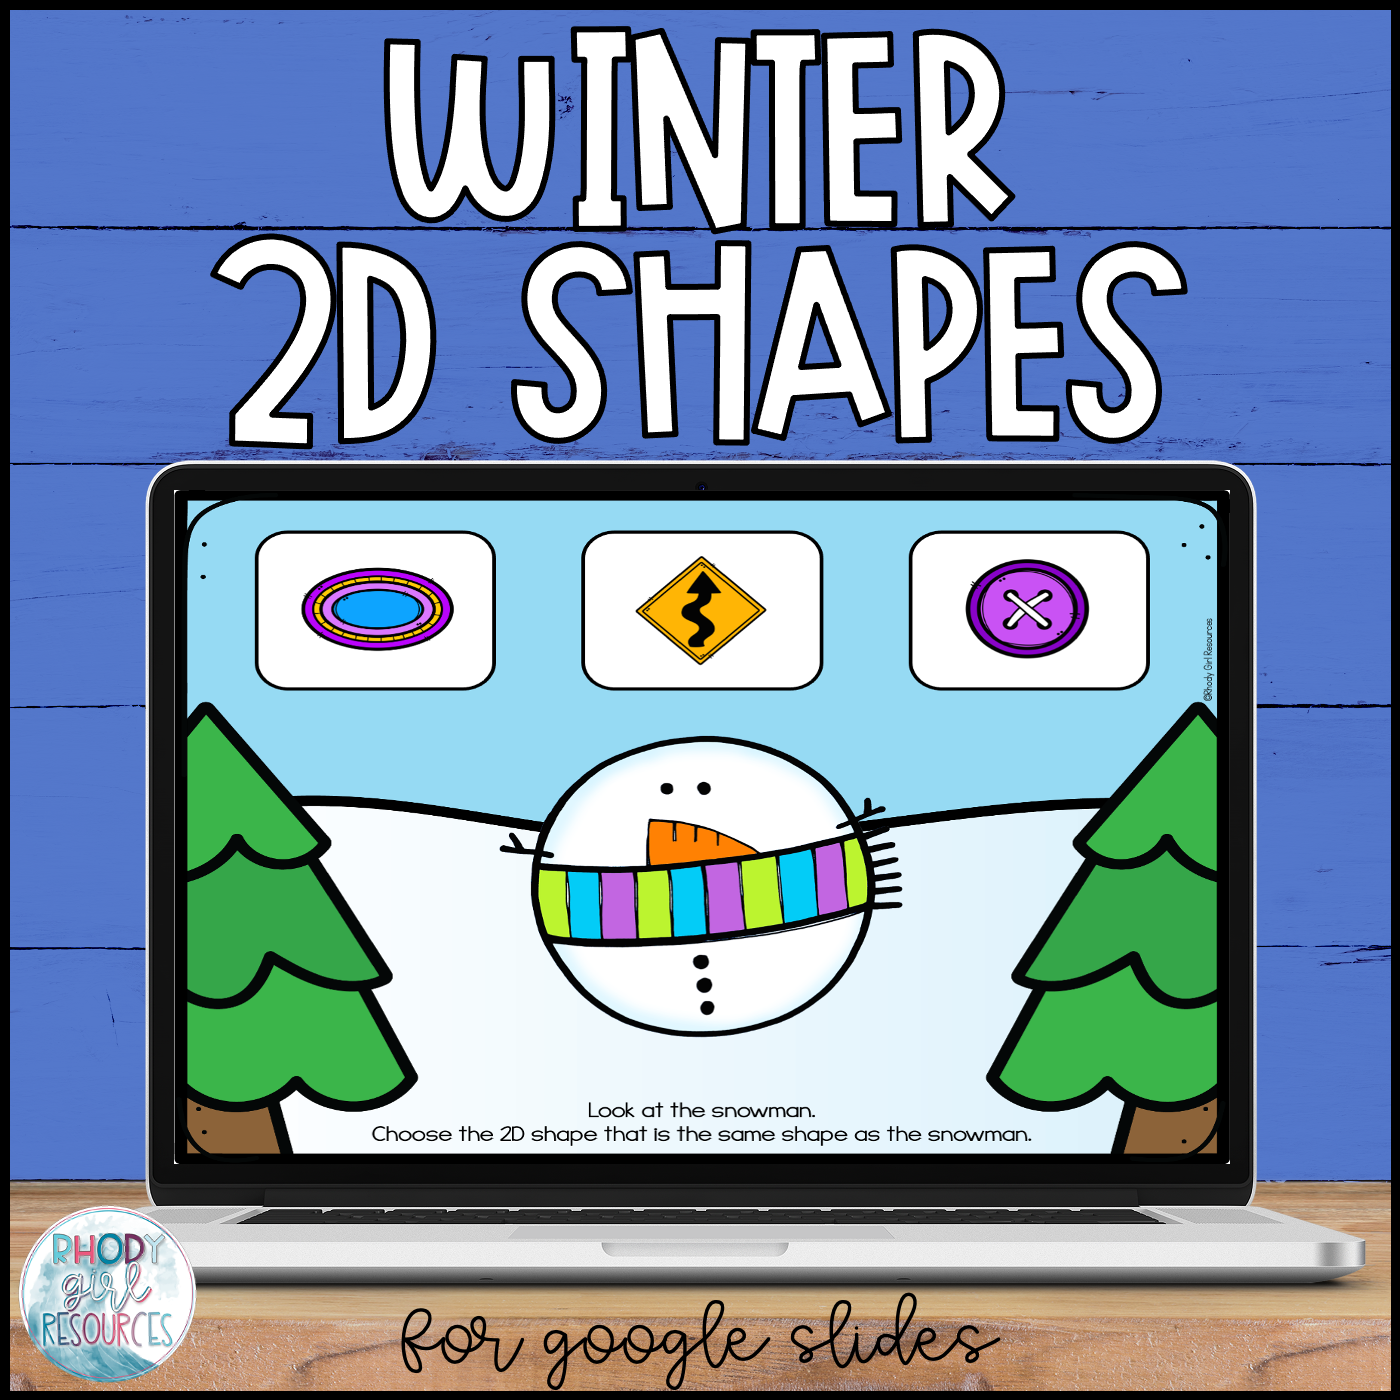 https://rhodygirlresources.com/wp-content/uploads/2021/01/Winter-2D-Shapes-for-GS-Cover.png